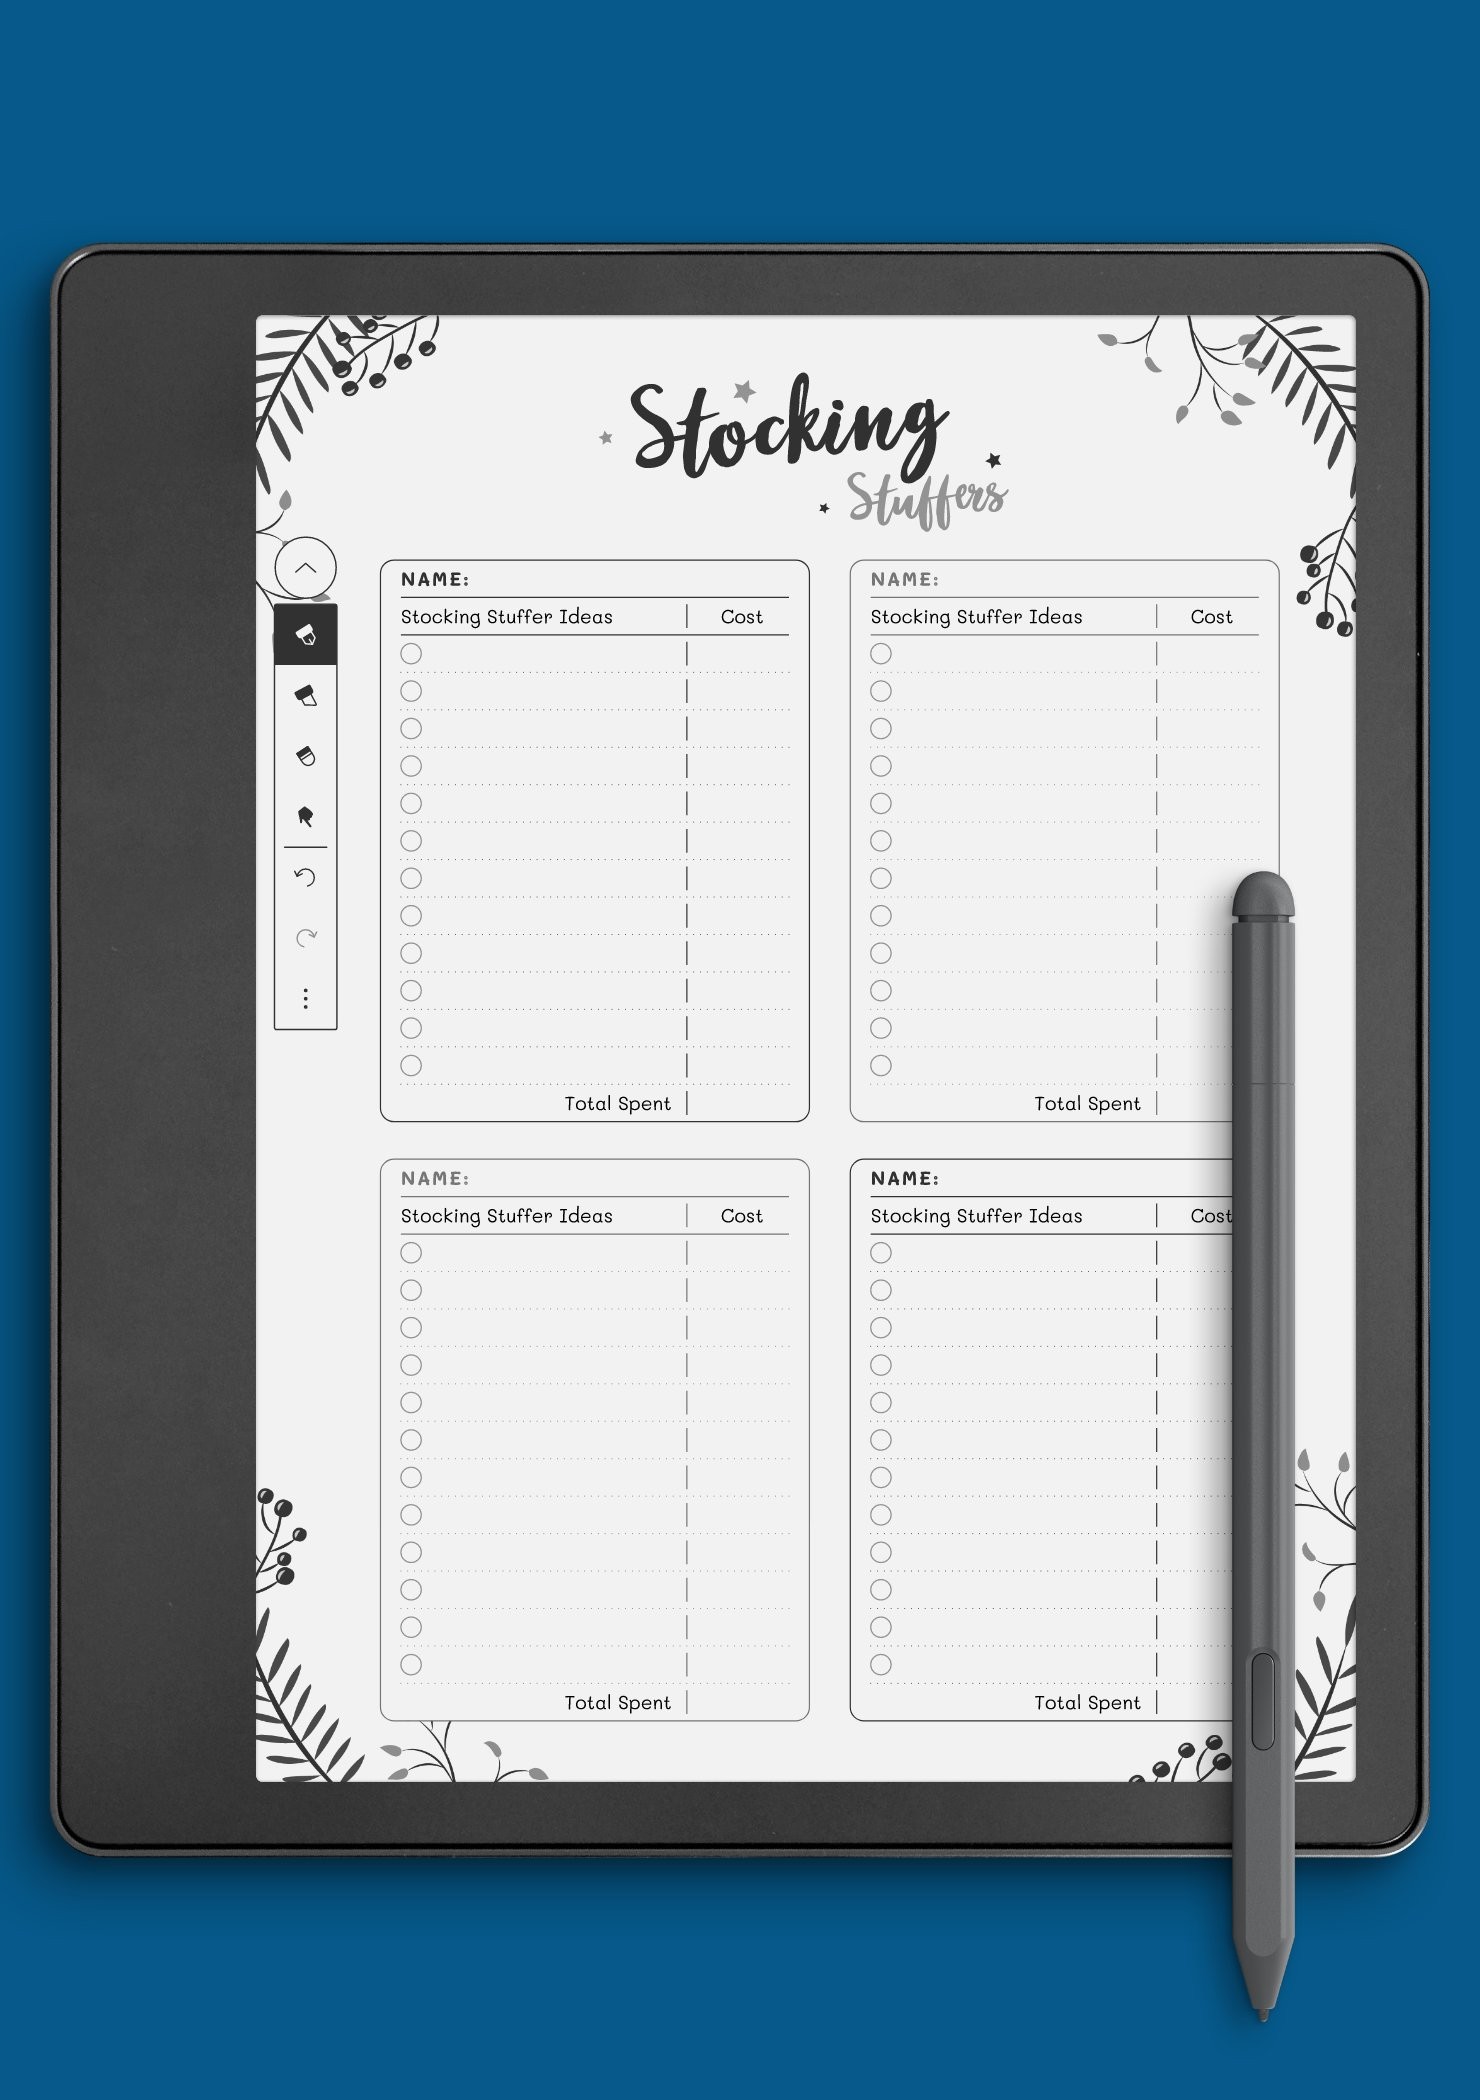 https://onplanners.com/sites/default/files/styles/template_fancy/public/teaser-photos/christmas-style-stocking-stuffers-kindle-scribe.jpeg